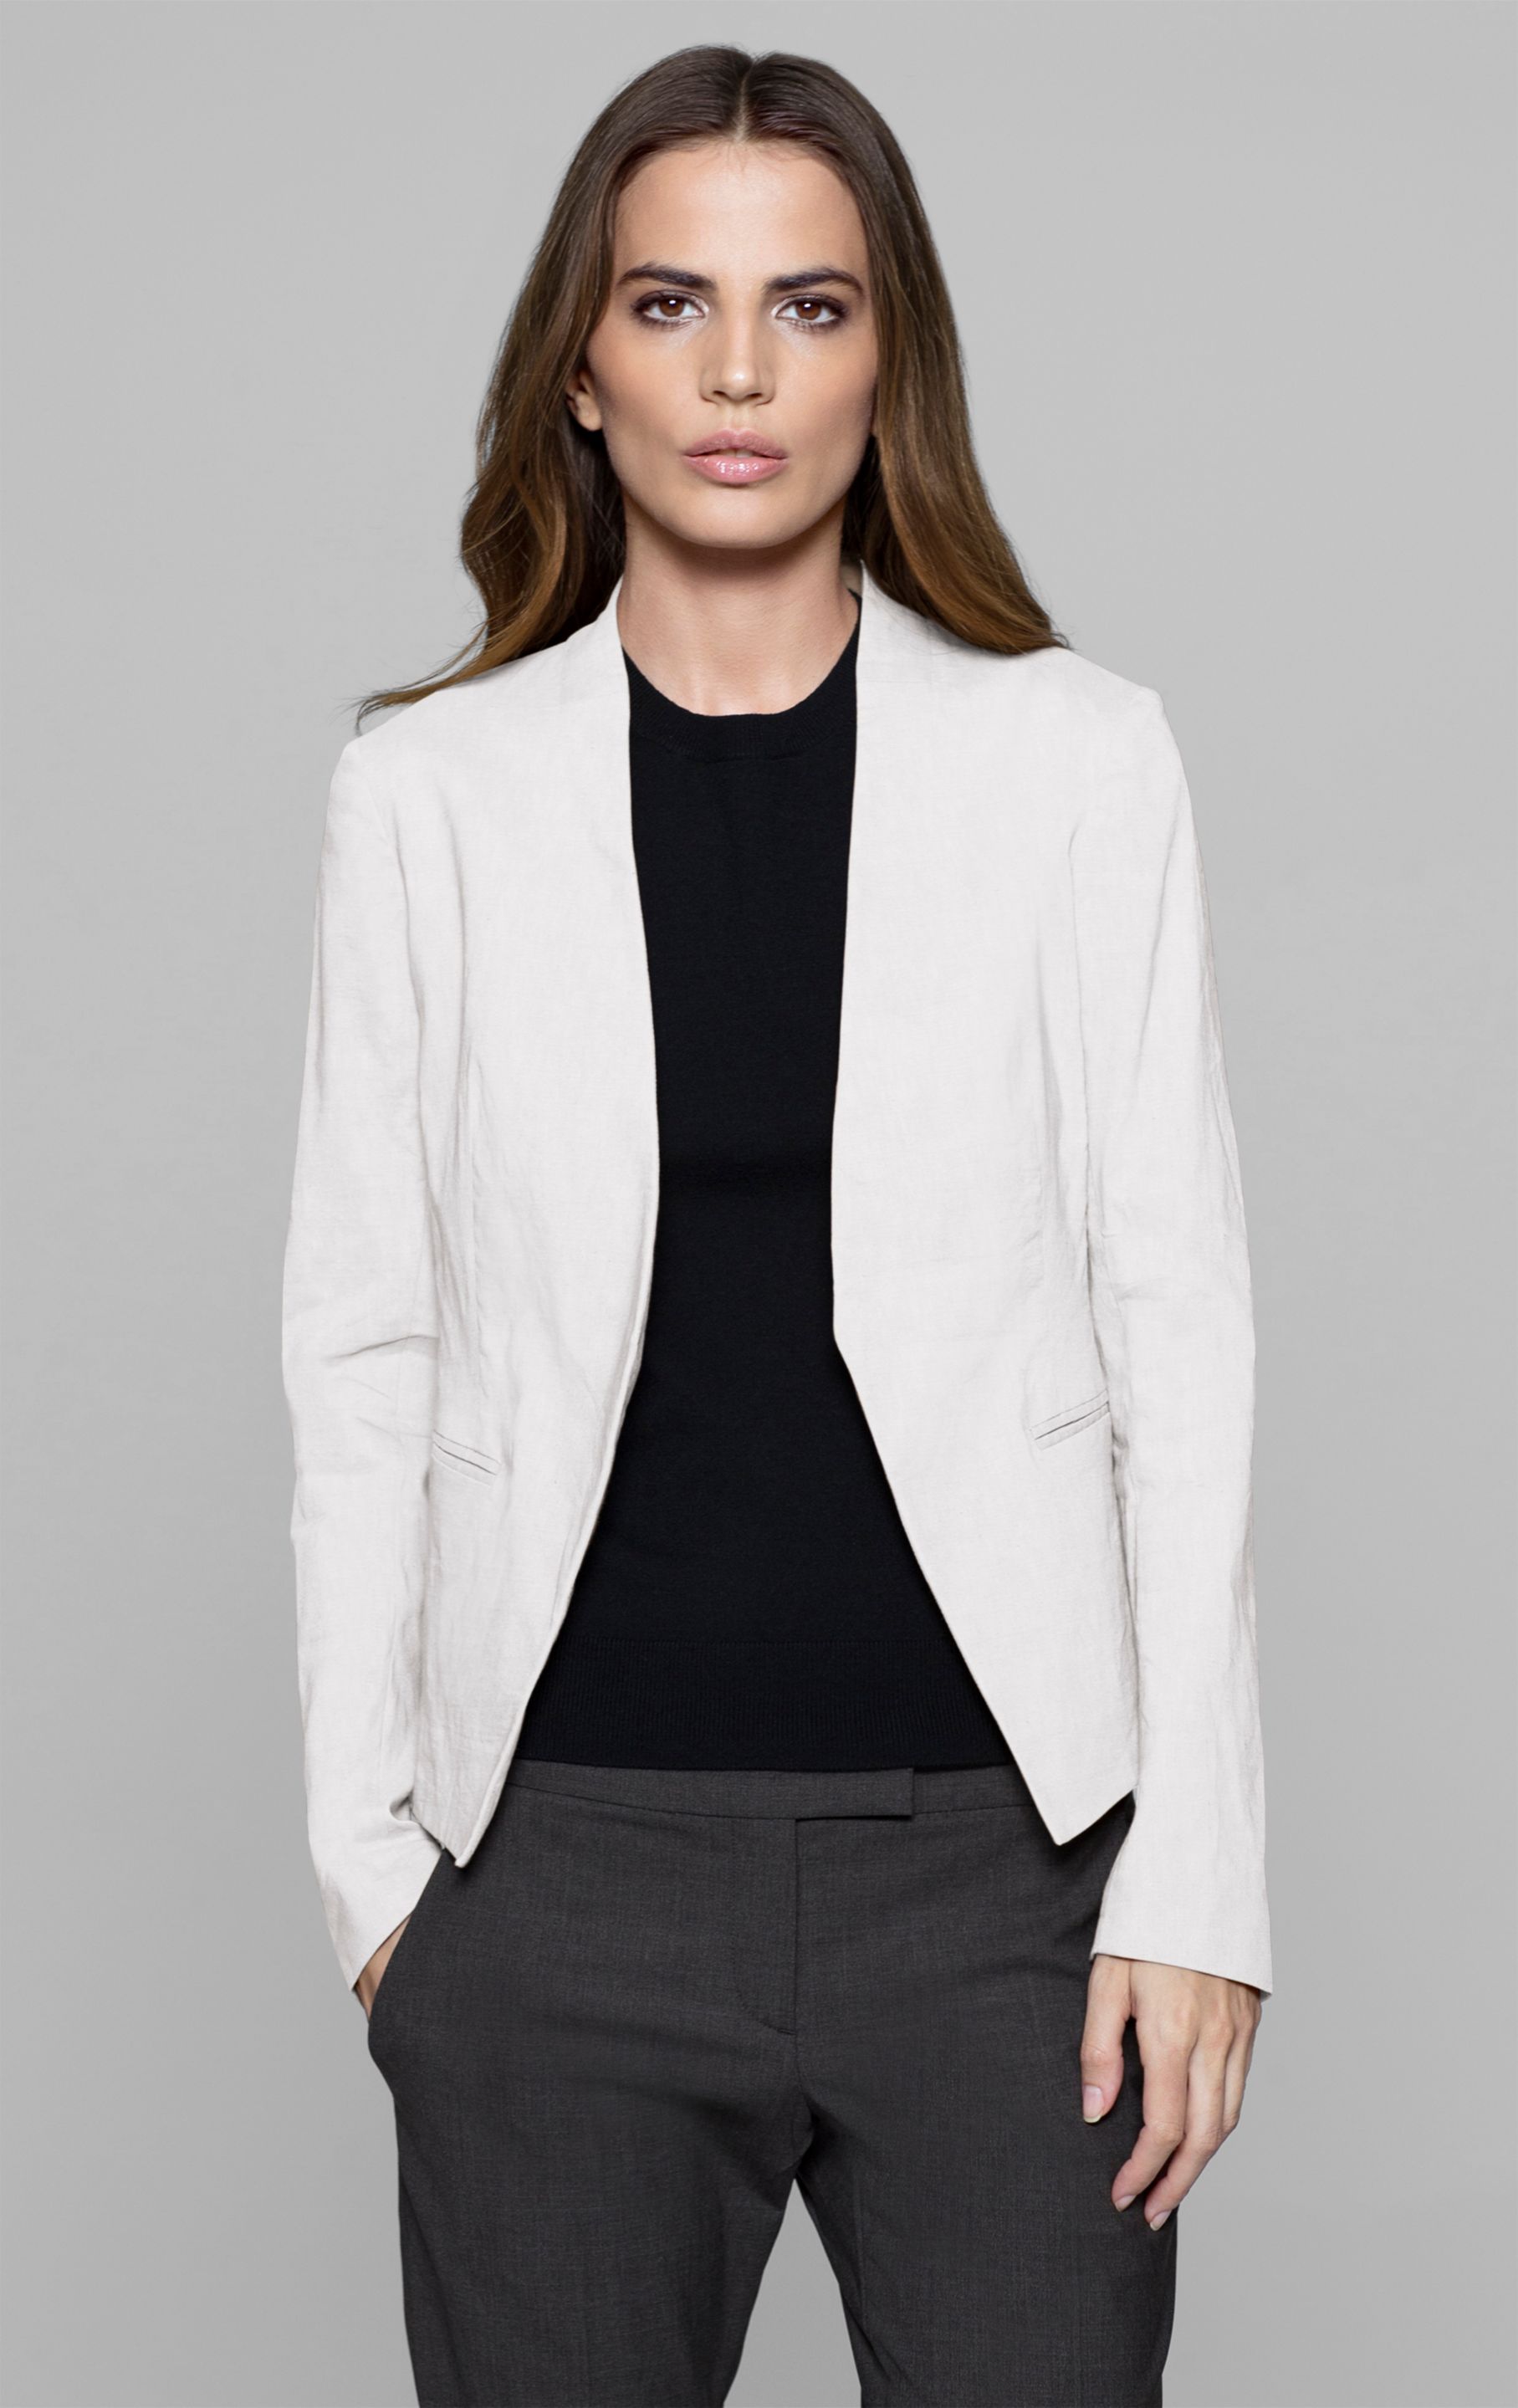 Lyst - Theory Lanai Linen Blend Jacket in White